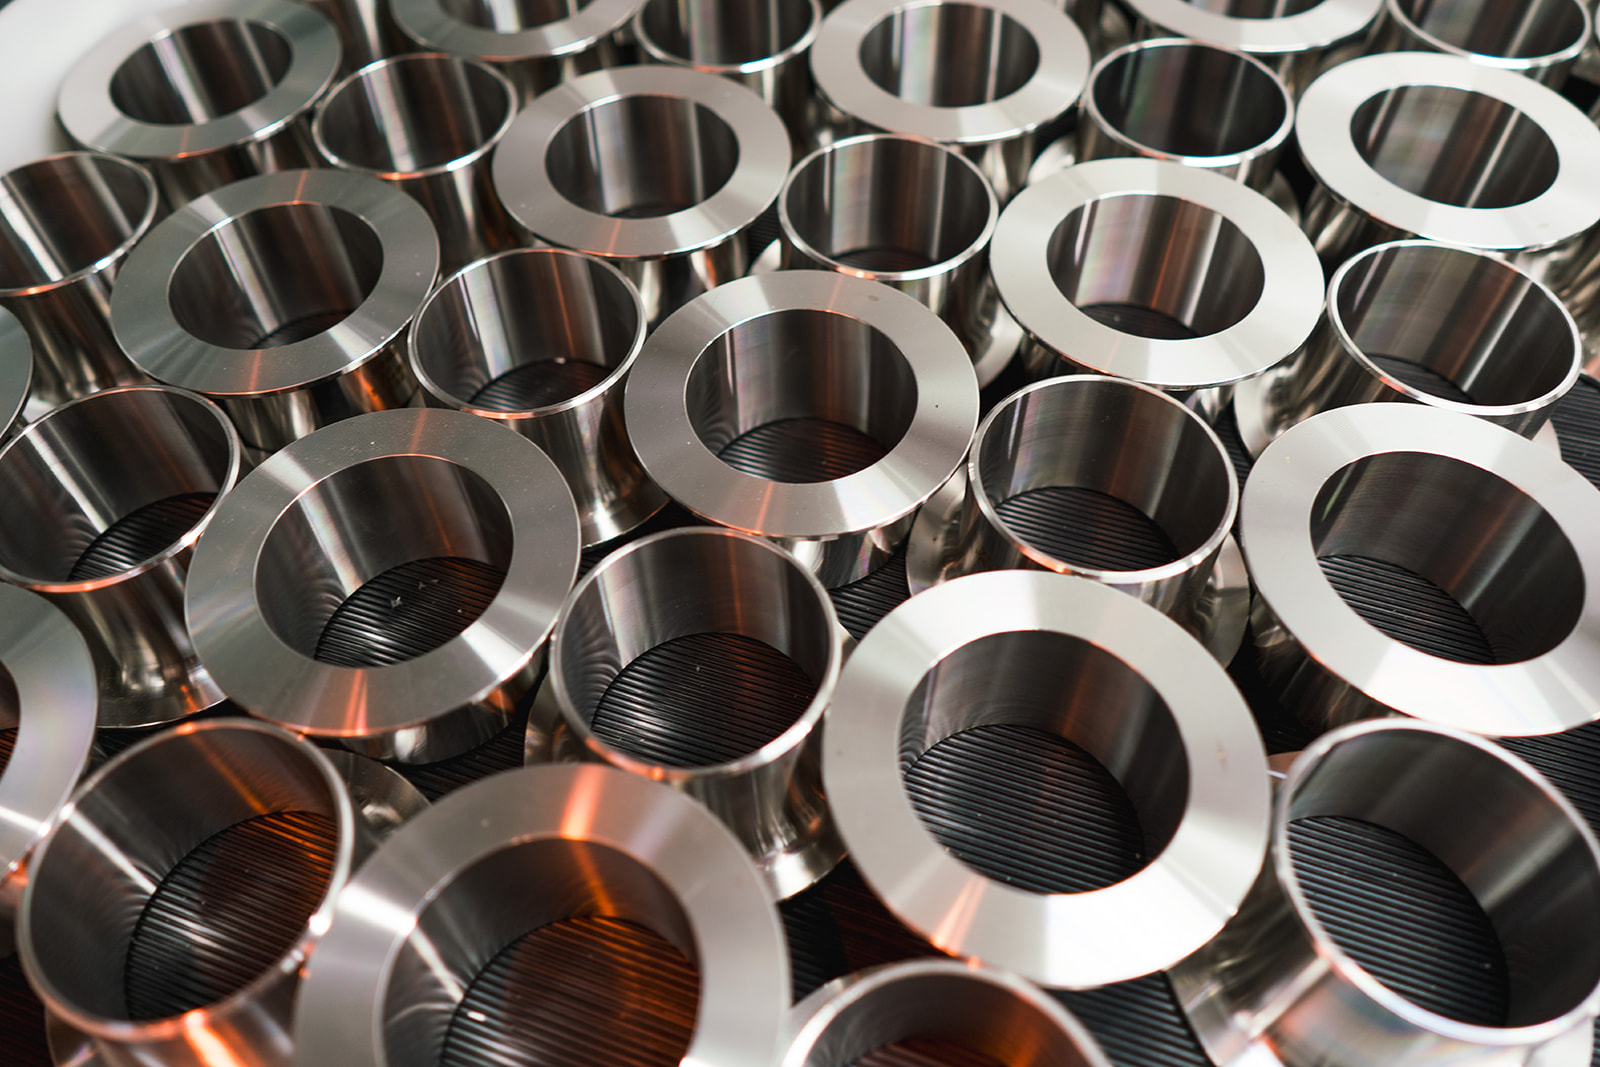 Stainless steel component stockholders